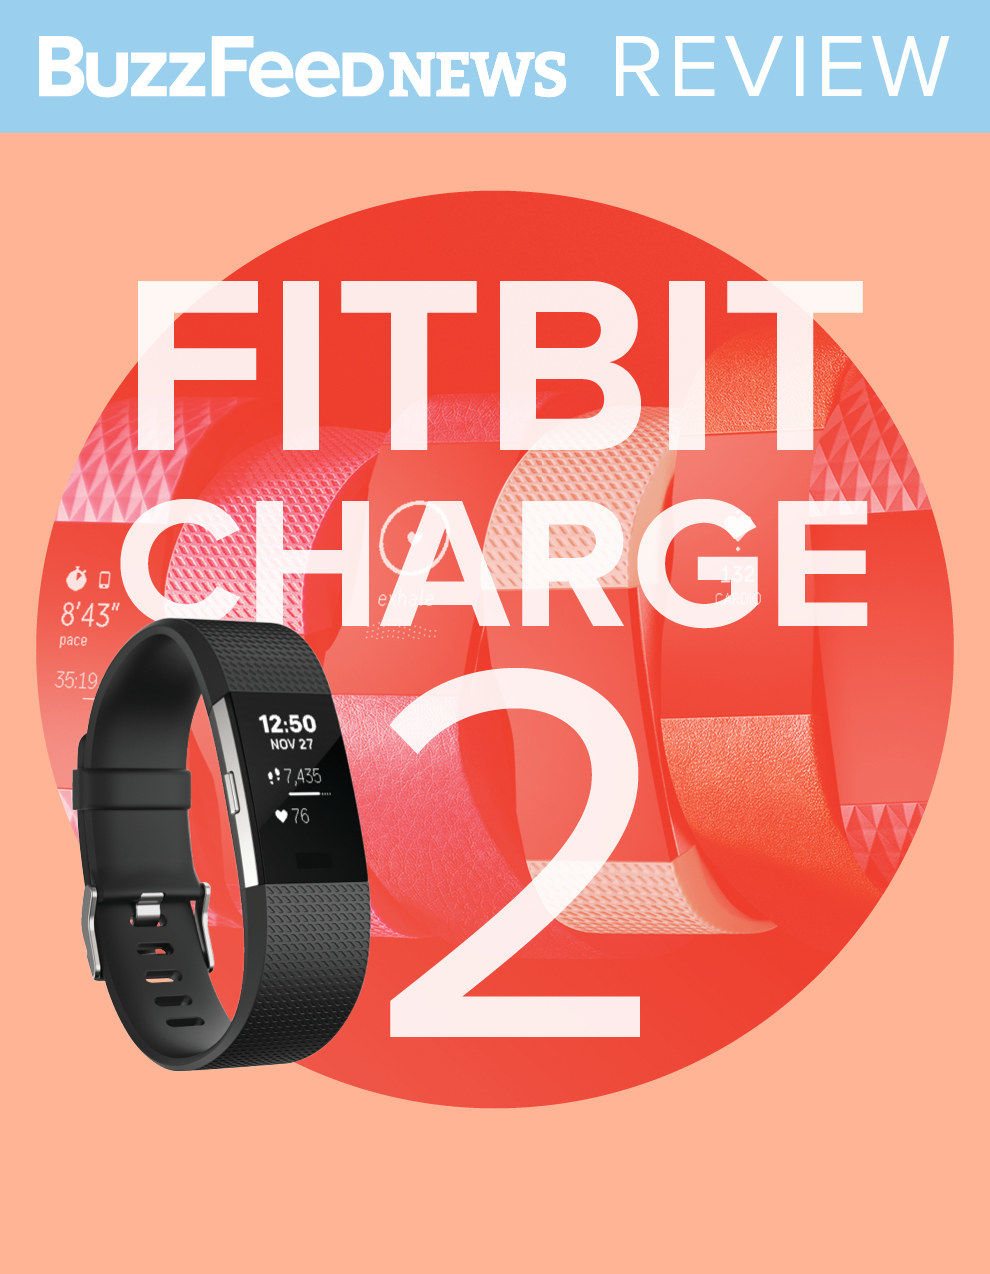 how to set interval timer on fitbit charge 3